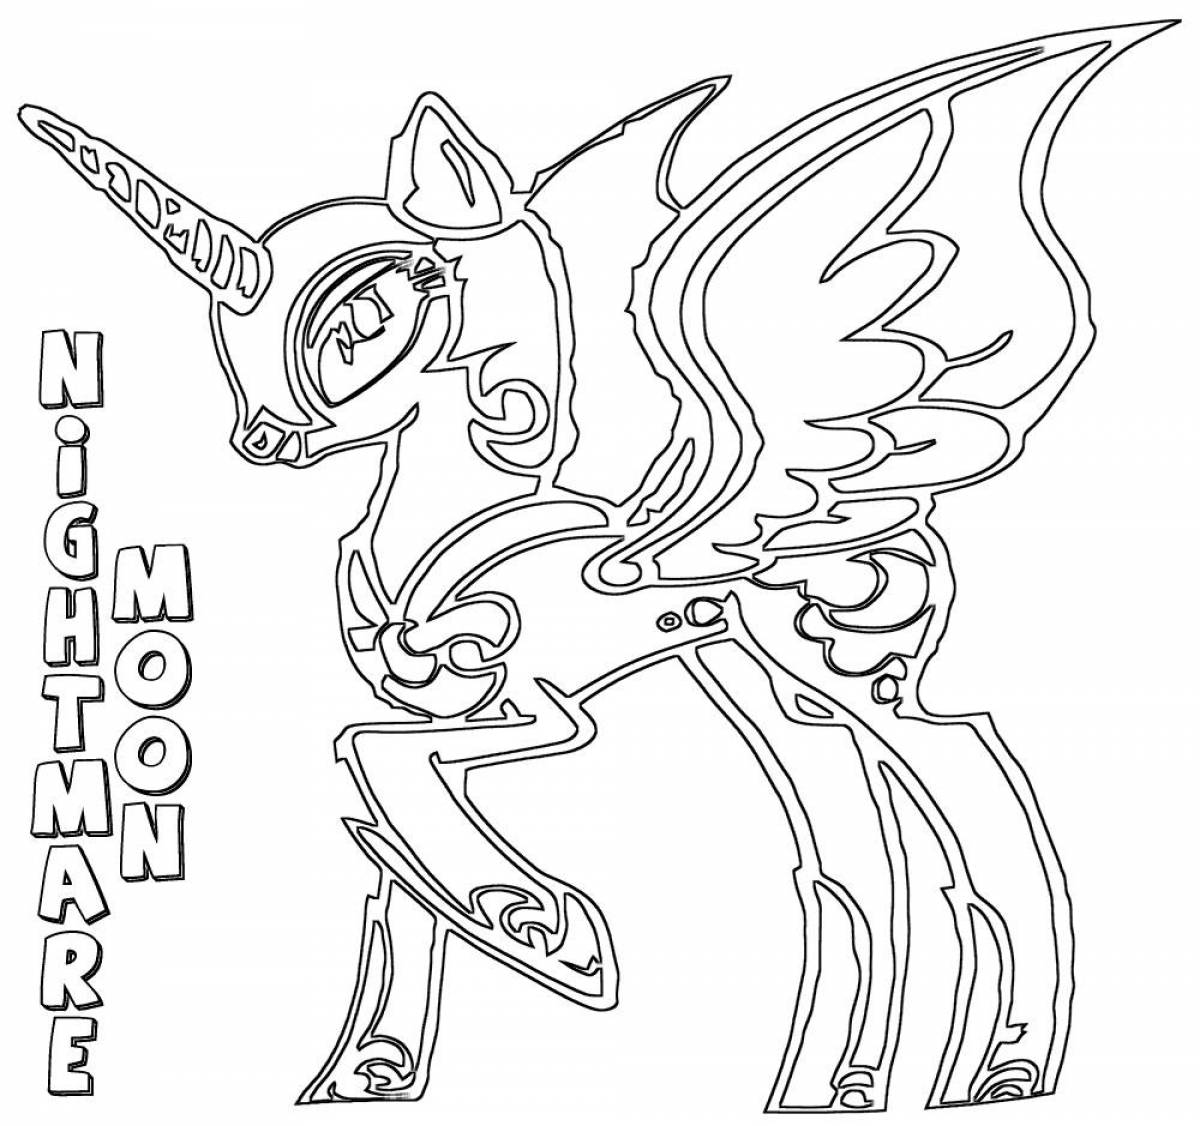 Blessed princess moon coloring page